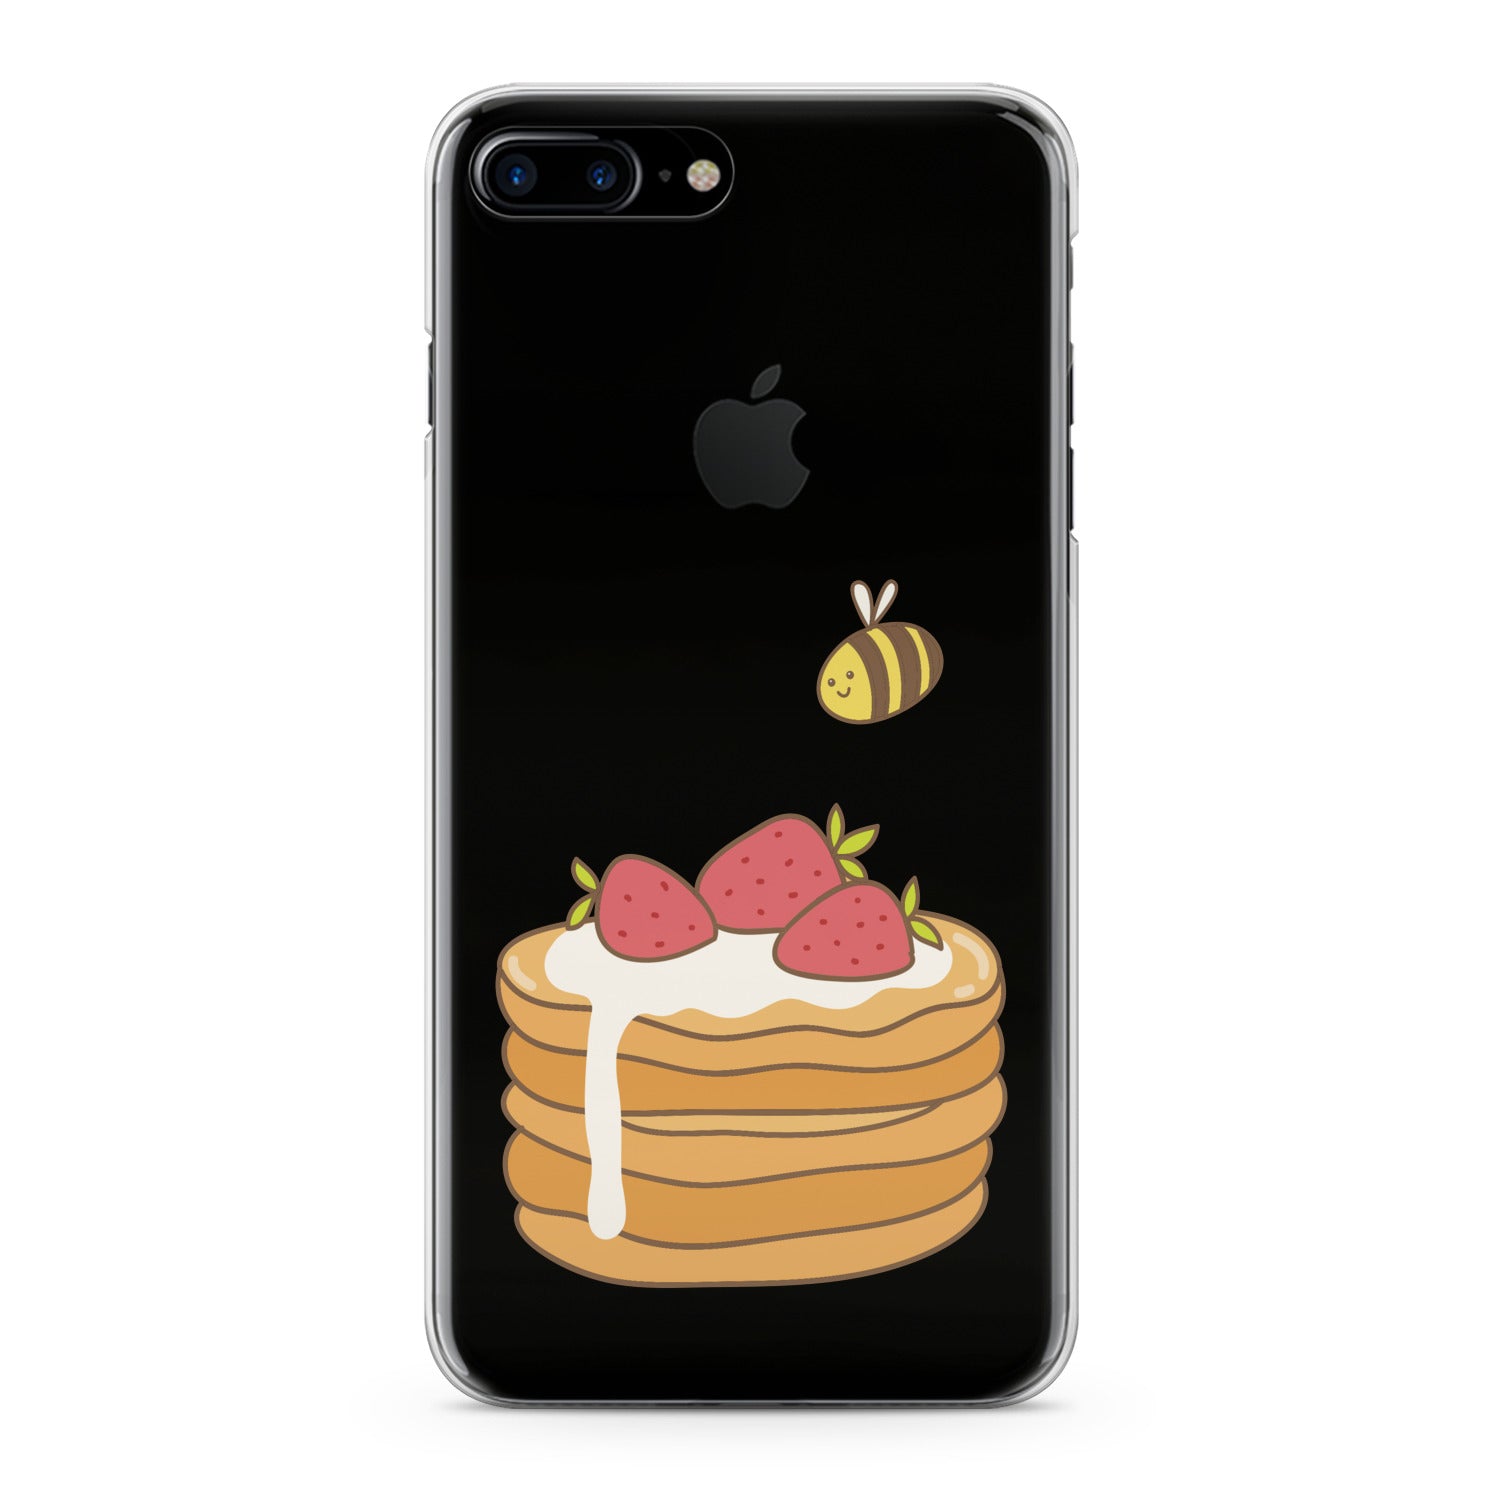 Lex Altern Dessert Pancakes Phone Case for your iPhone & Android phone.